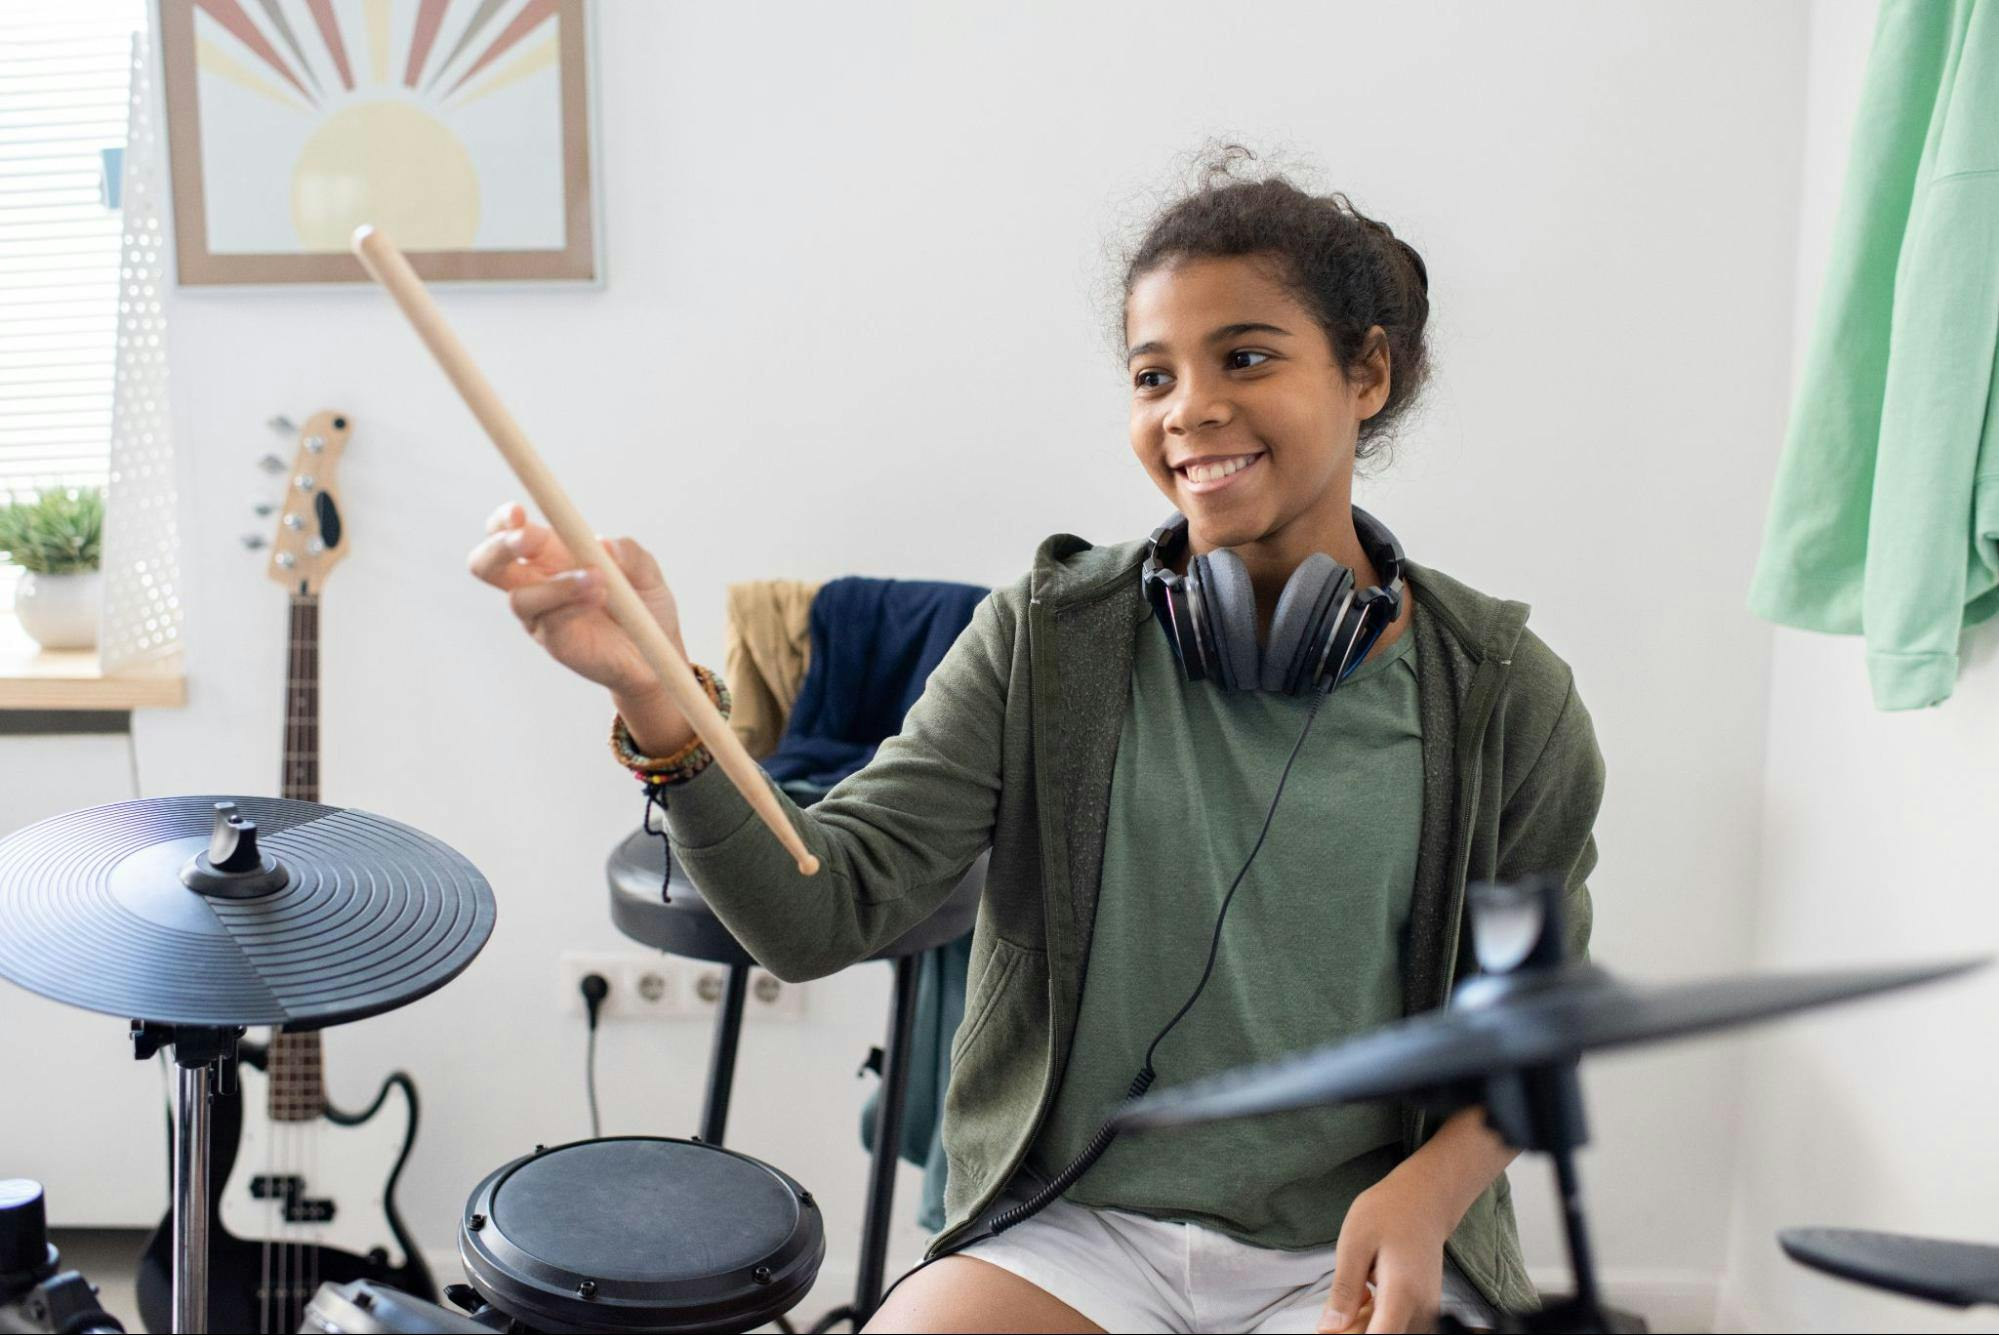 6 Reasons Why Teaching Music Online is a Great Source of Income